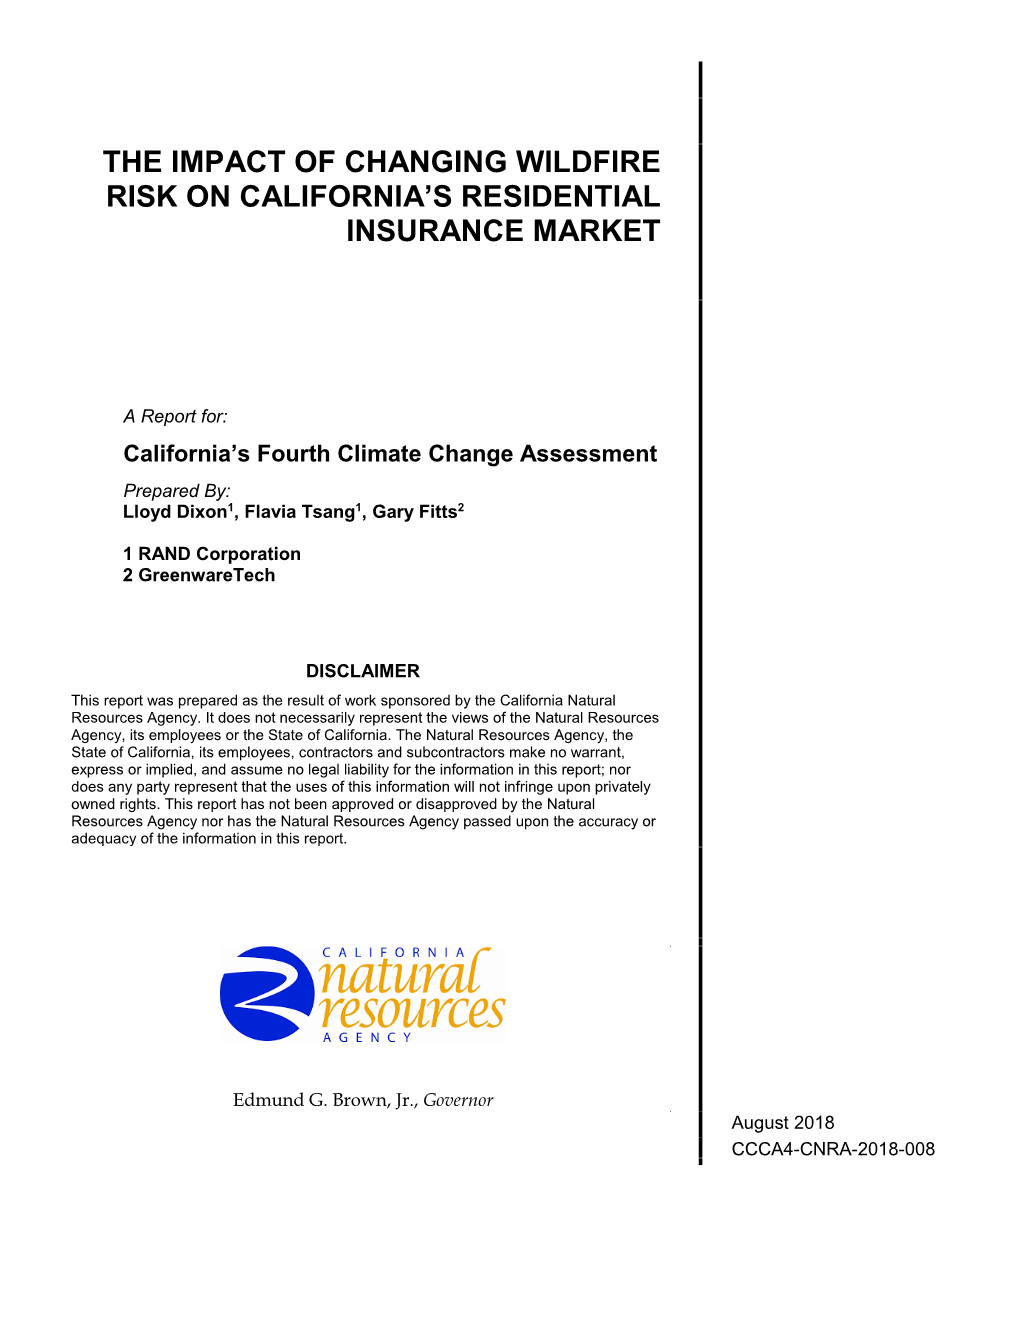 The Impact of Changing Wildfire Risk on California's Residential